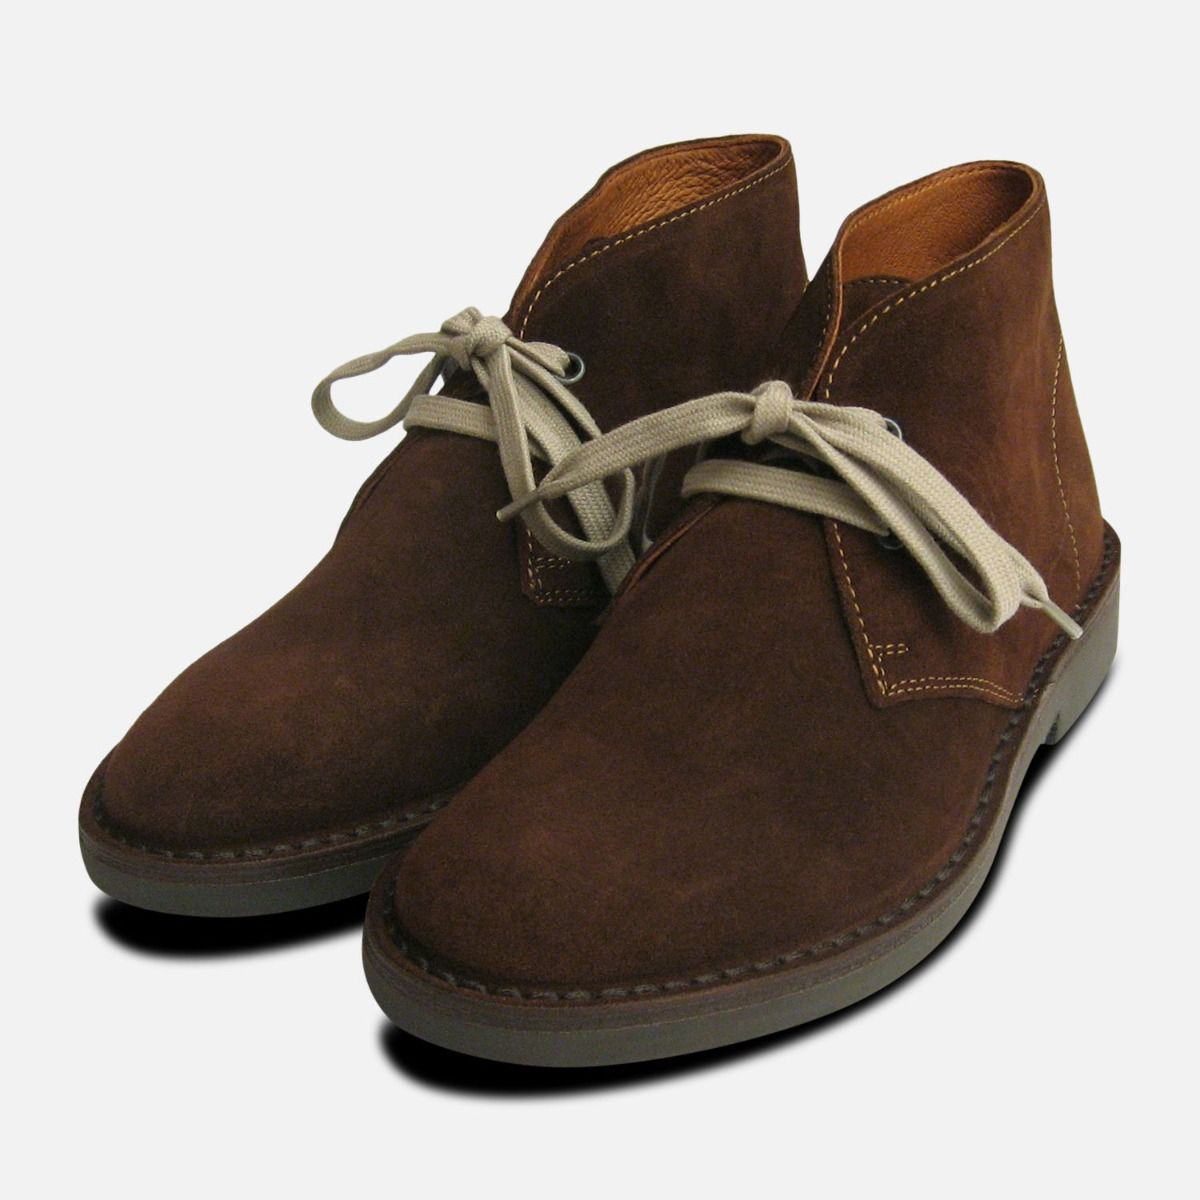 chocolate suede shoes